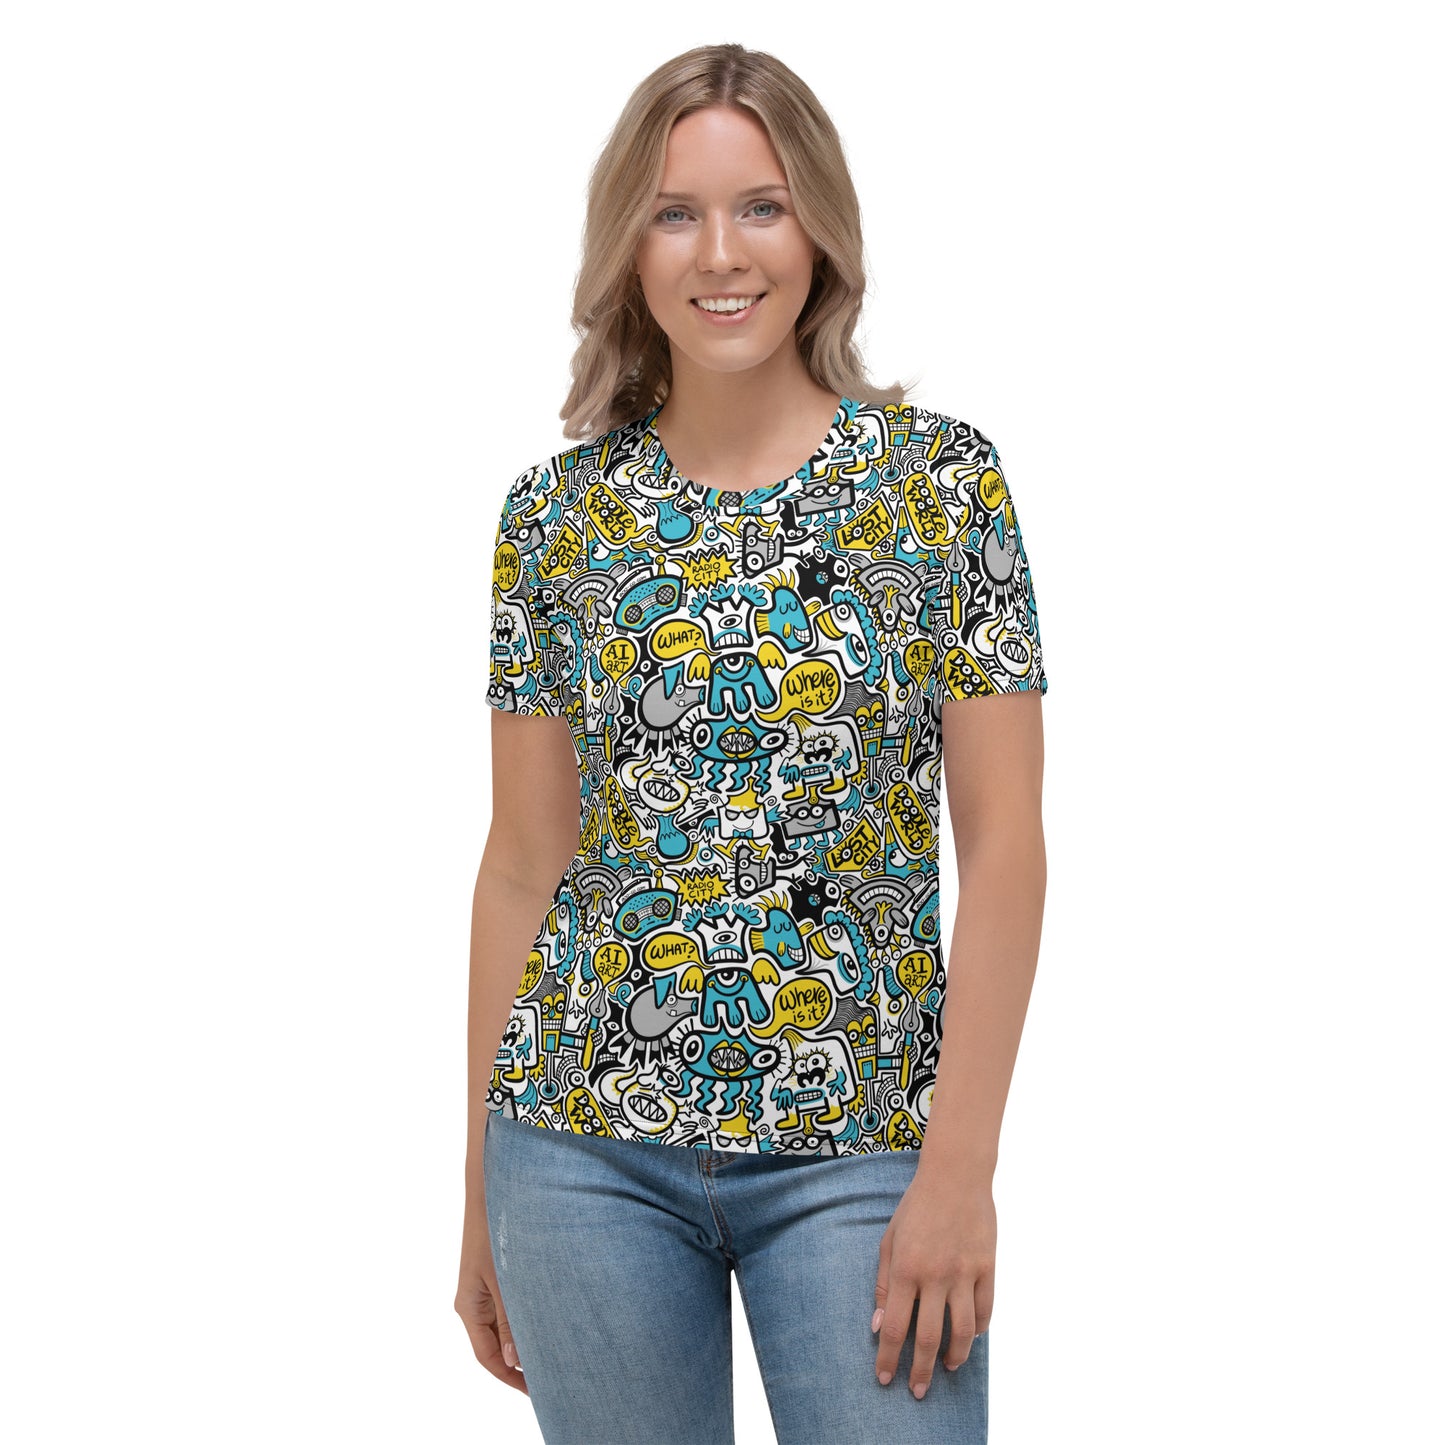 Discover a whole Doodle world in Lost city All-over print Women's T-shirt. Front view